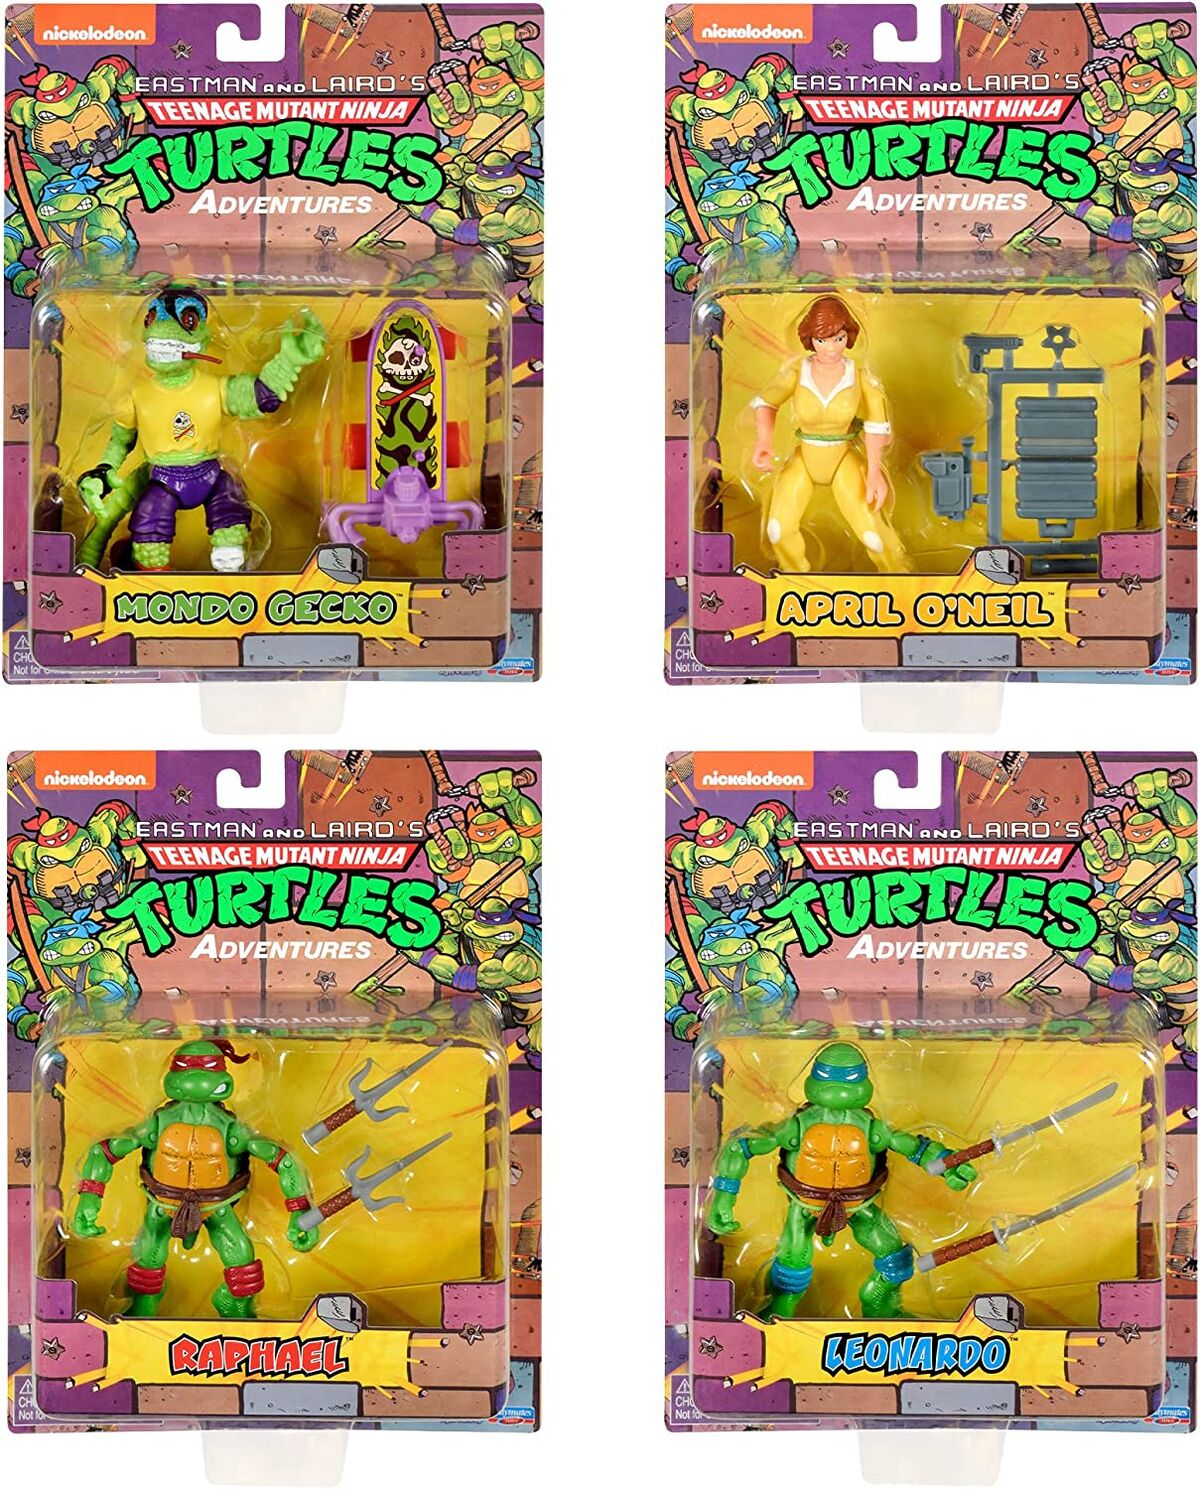 https://static.wikia.nocookie.net/tmnt/images/8/8c/Adventures_set_1_packed.jpg/revision/latest/scale-to-width-down/1200?cb=20230731124235